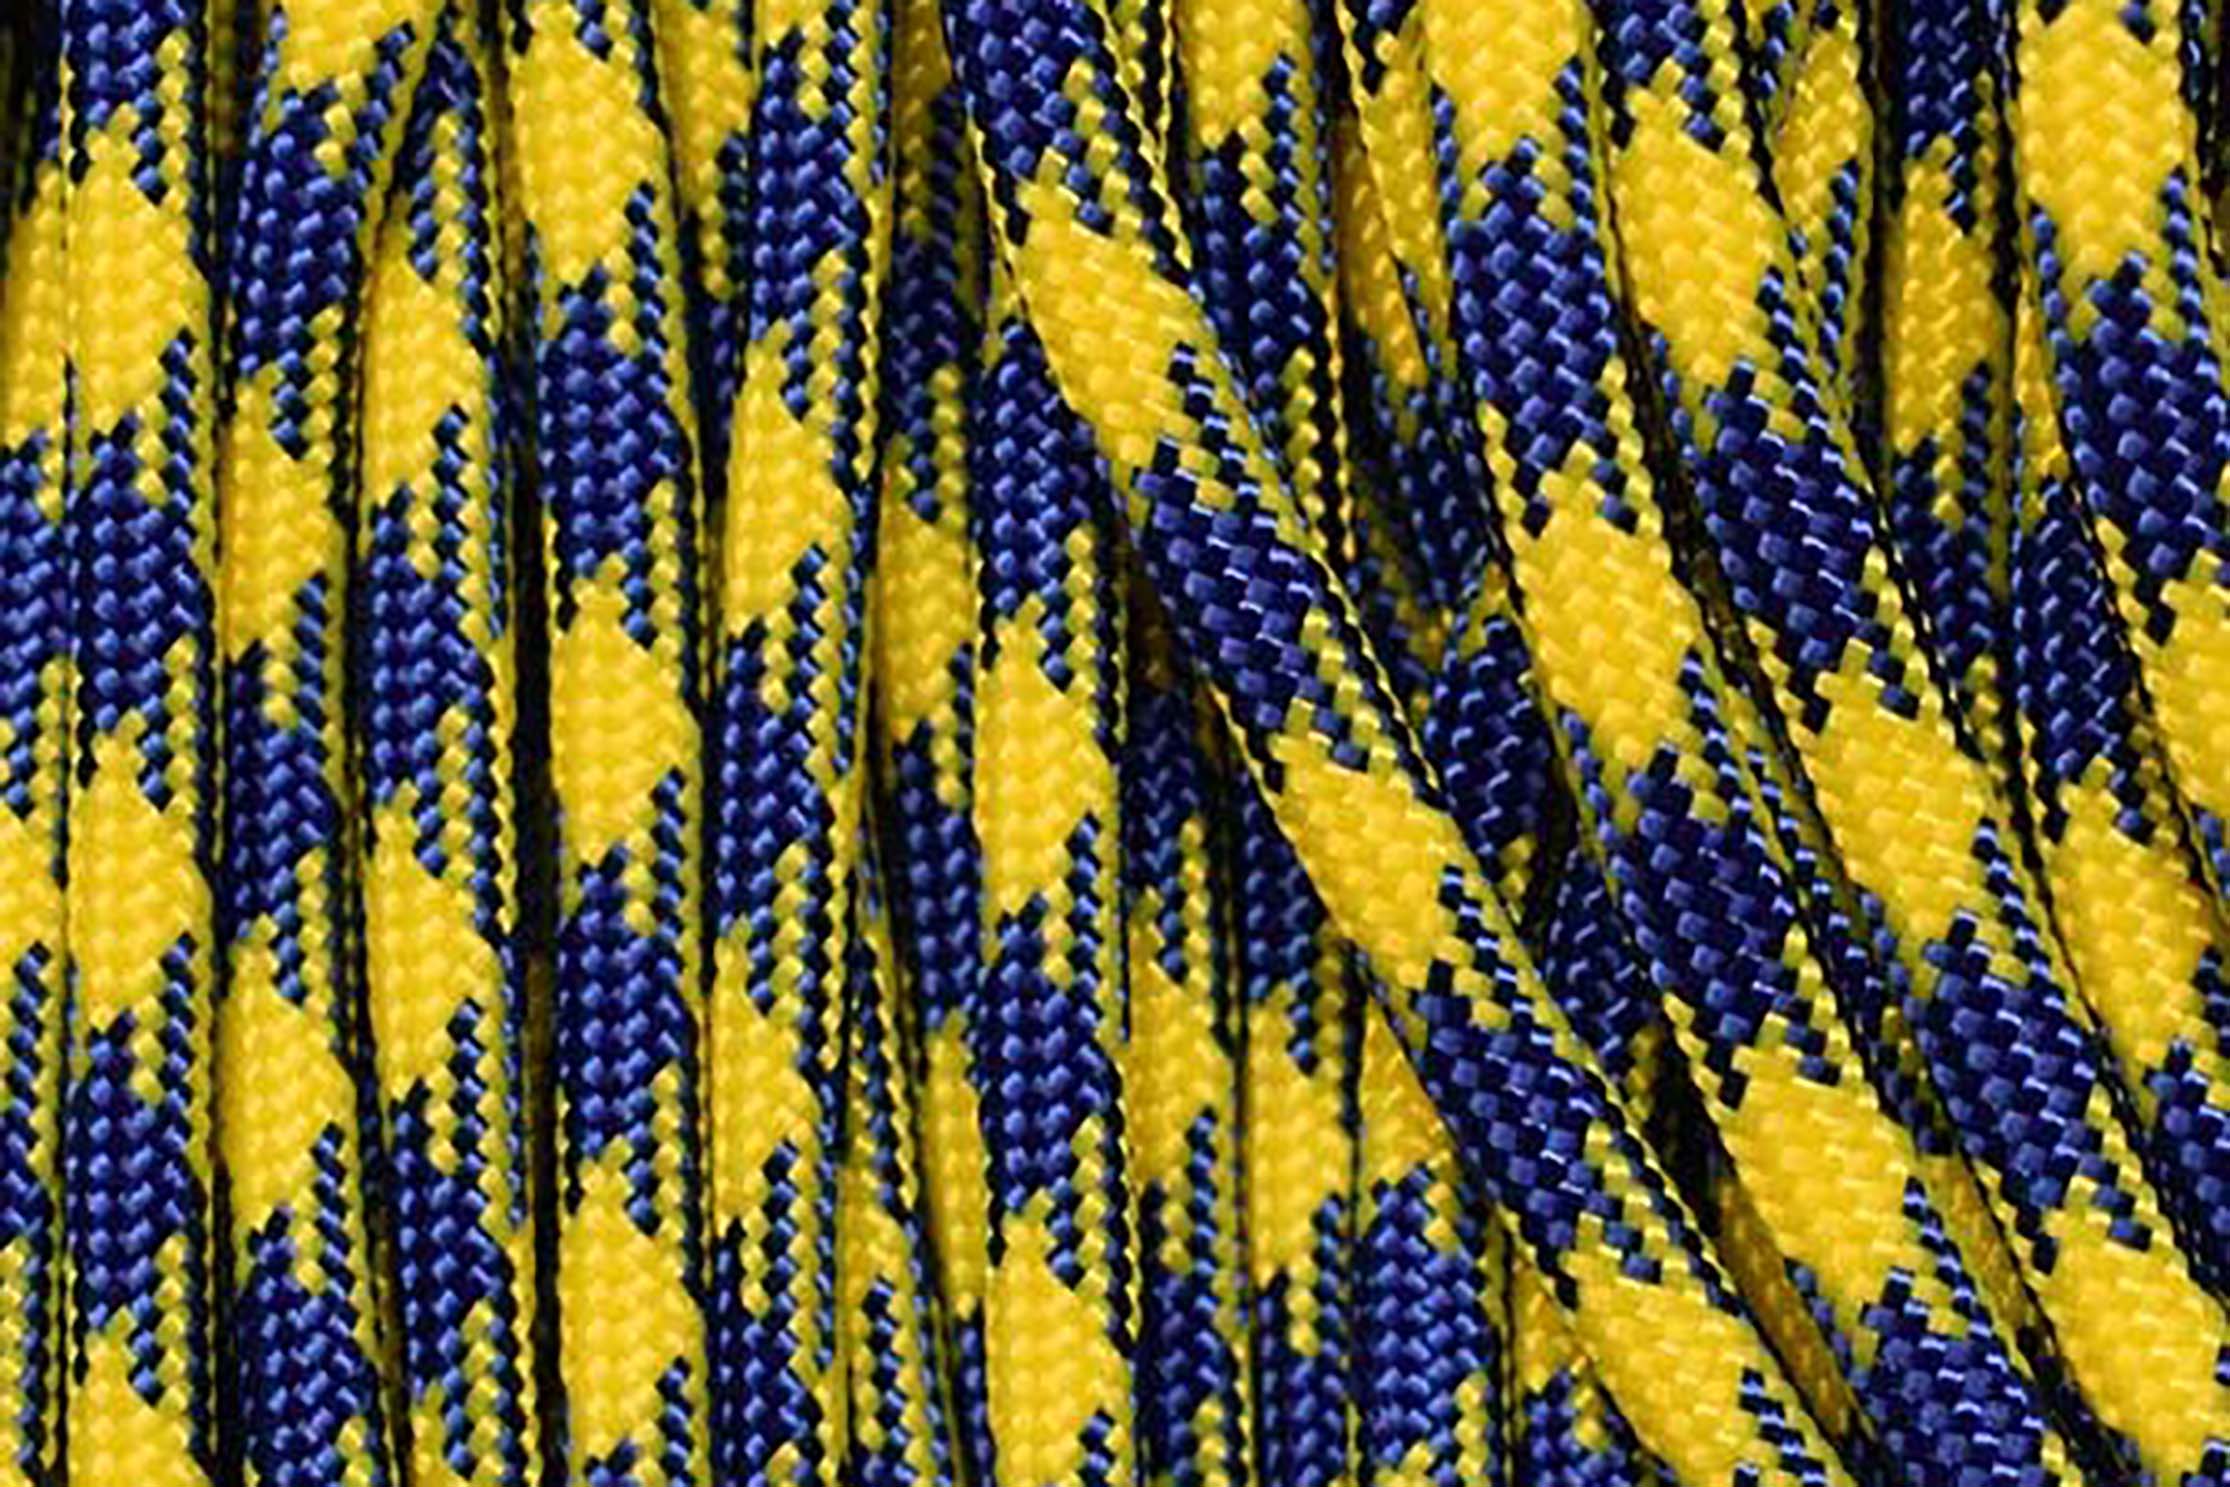 Electric Blue & Canary Yellow Paracord Bracelet